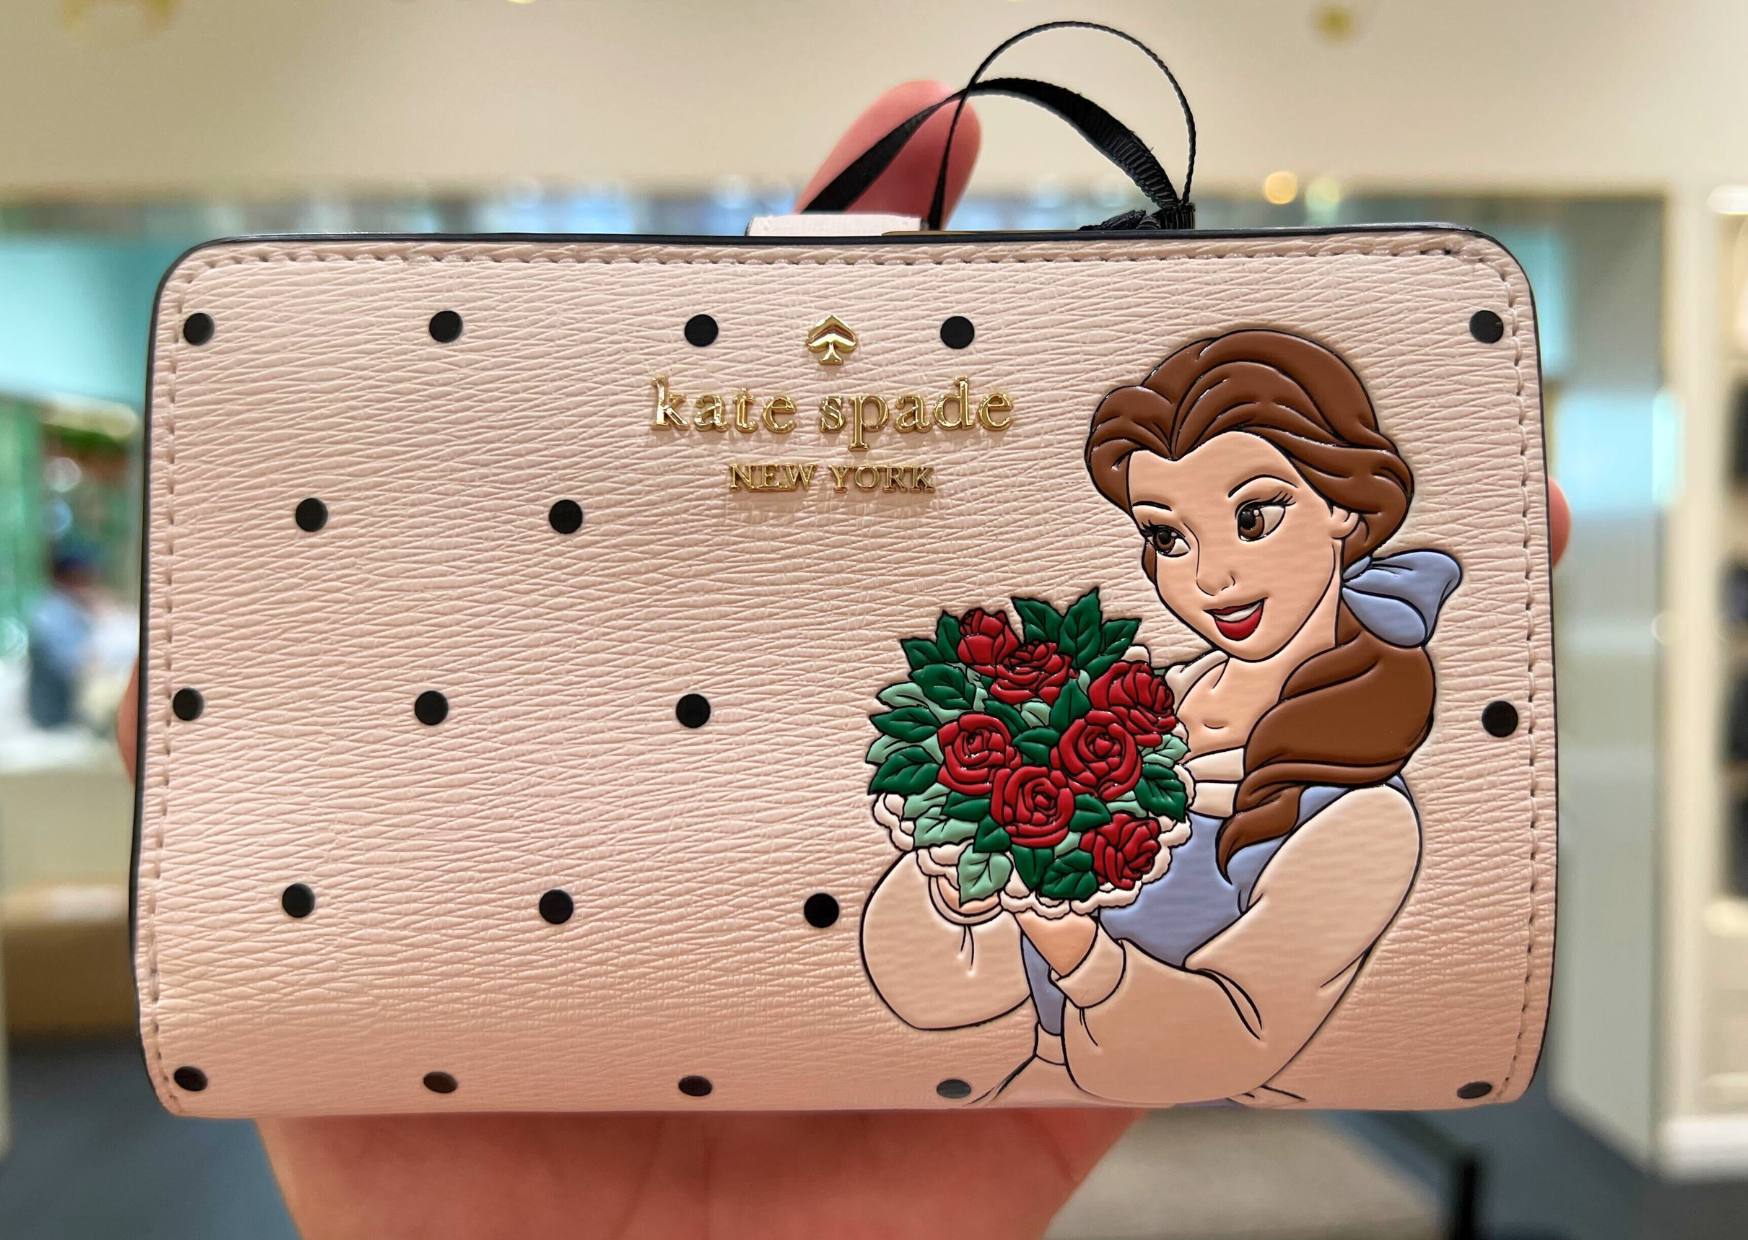 We're Loving The NEW Kate Spade Disney Parks Collection in Disney